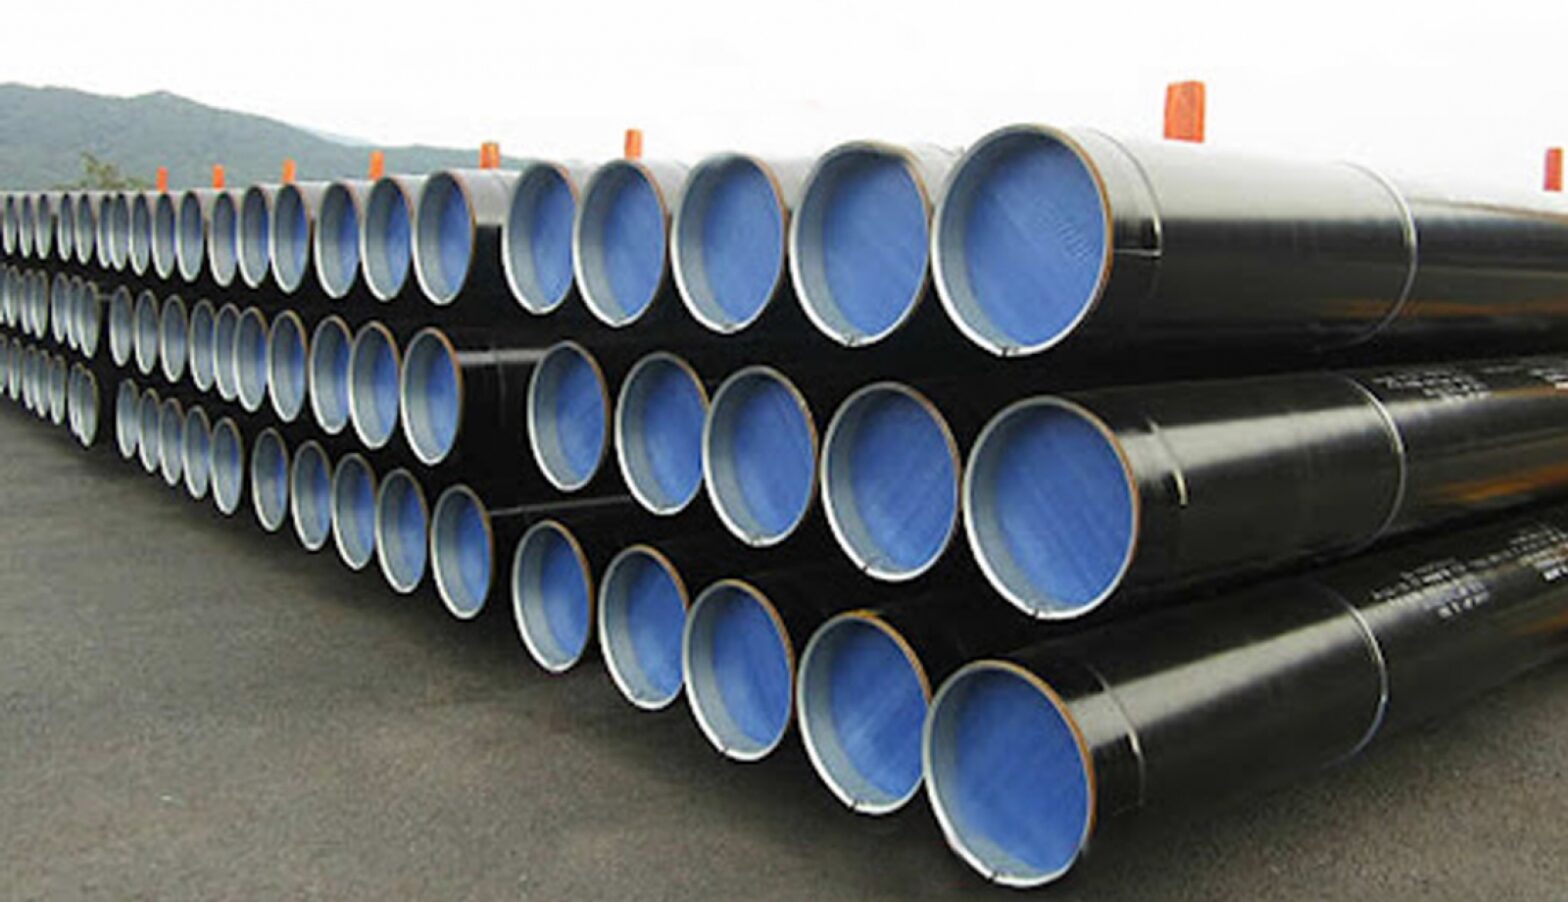 Helical Submerged Arc Welded (HSAW) Pipes Market